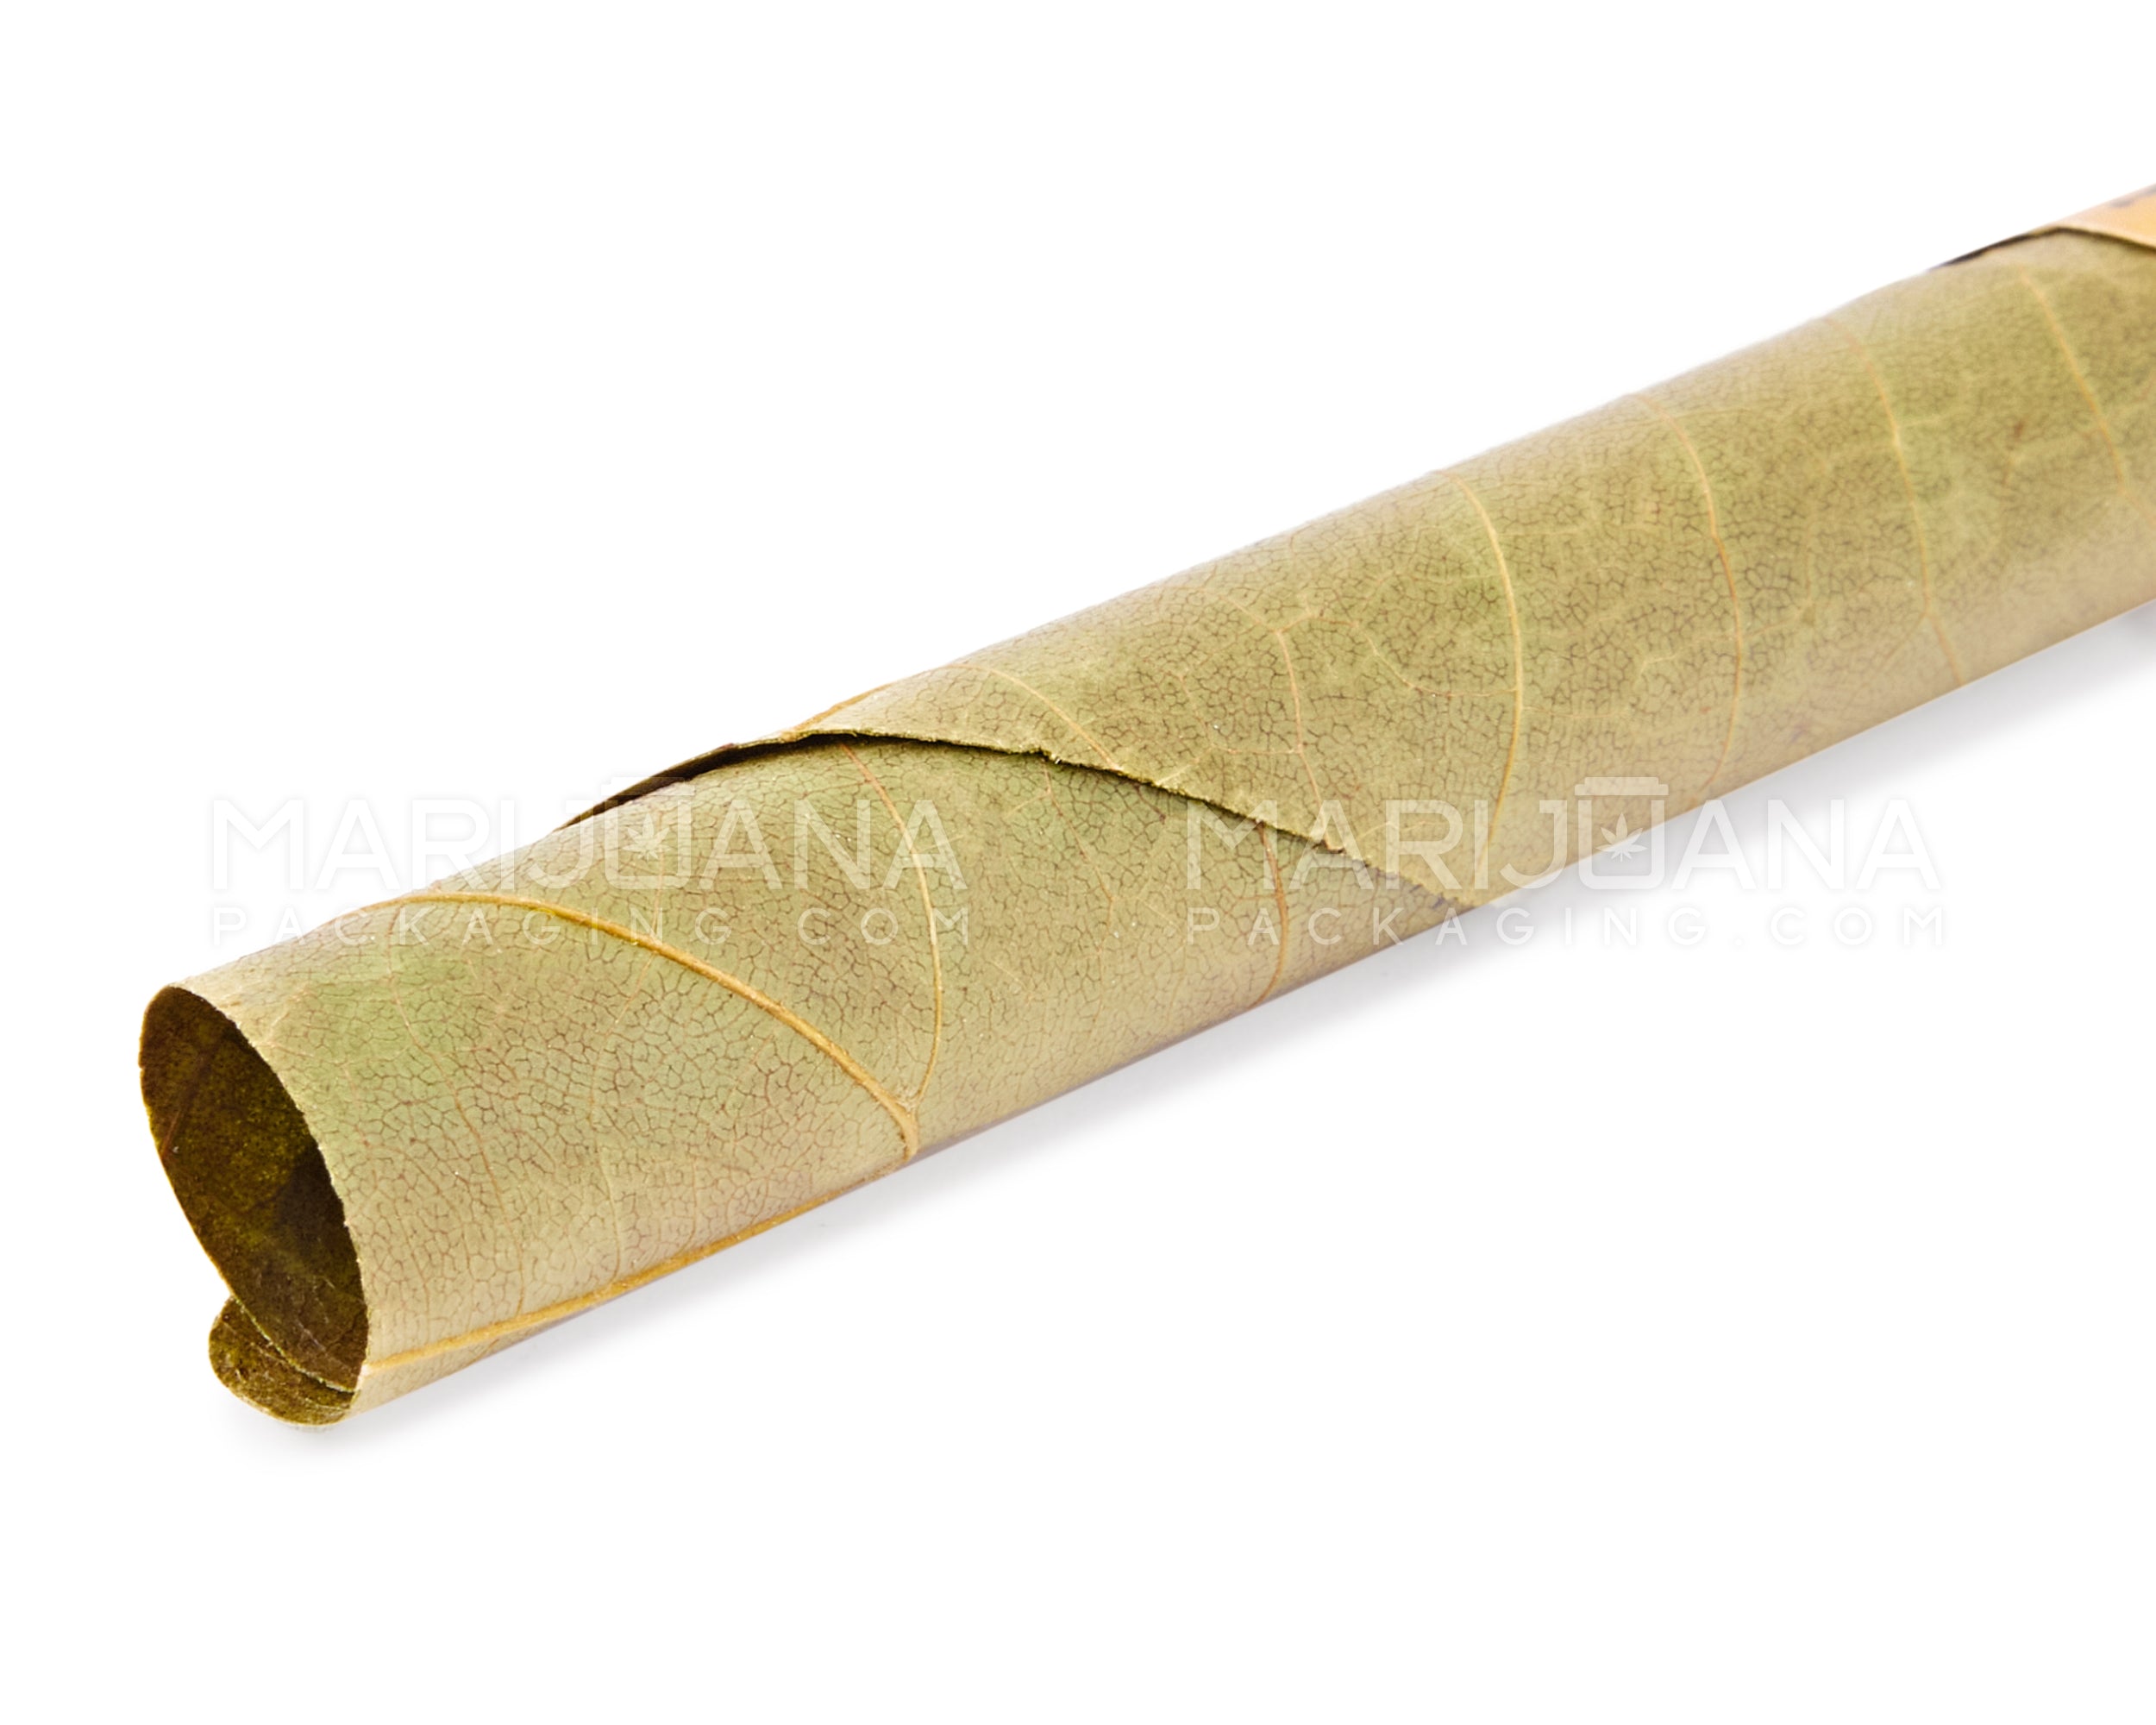 KING PALM | 'Retail Display' Mini Green Natural Leaf Blunt Wraps | 84mm - Berry Terps - 15 Count - 7